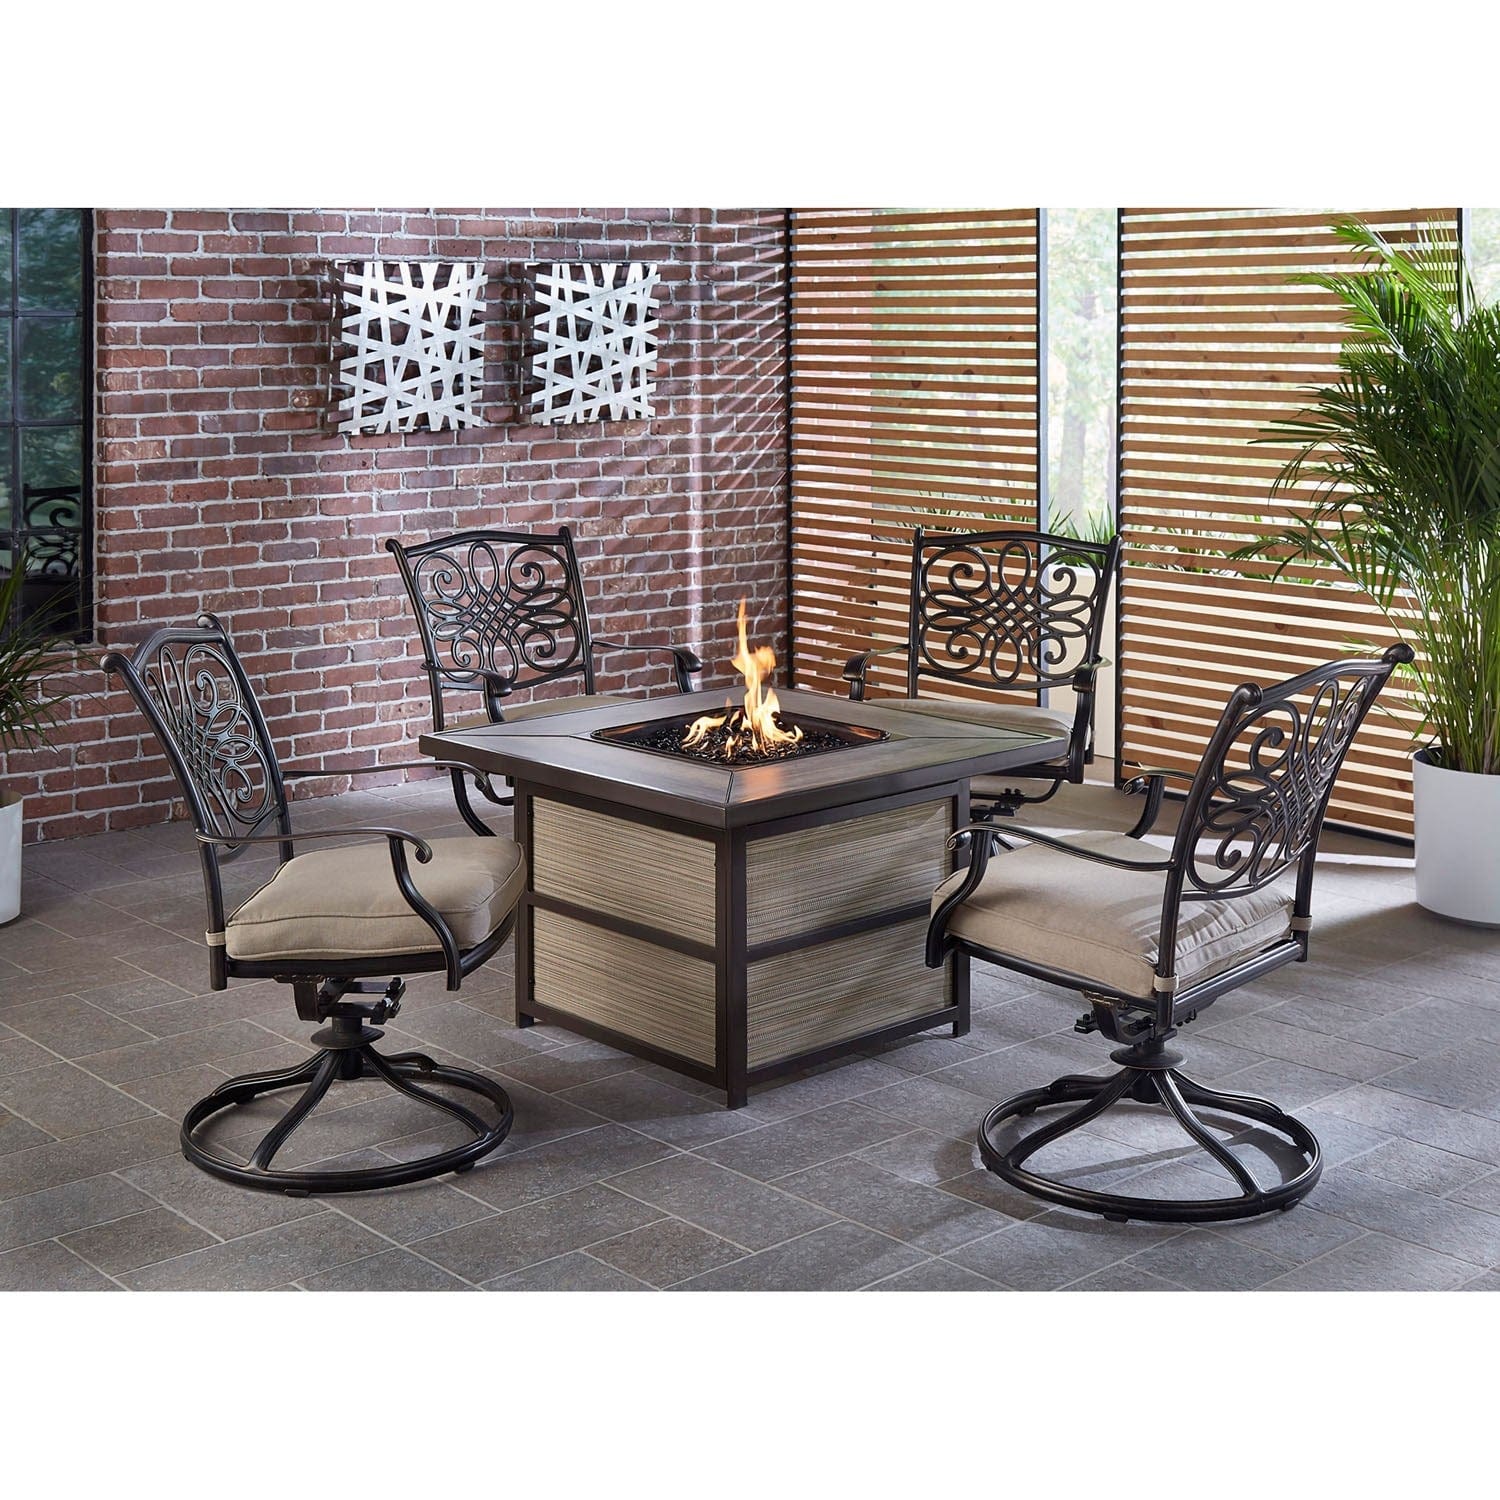 Hanover Fire Pit Chat Set Hanover - Traditions 5-Piece Aluminum Frame Fire Pit Chat Set with 4 Swivel Rockers in Tan with a 40,000 BTU Fire Pit Table | TRAD5PCSQSW4FP-TAN